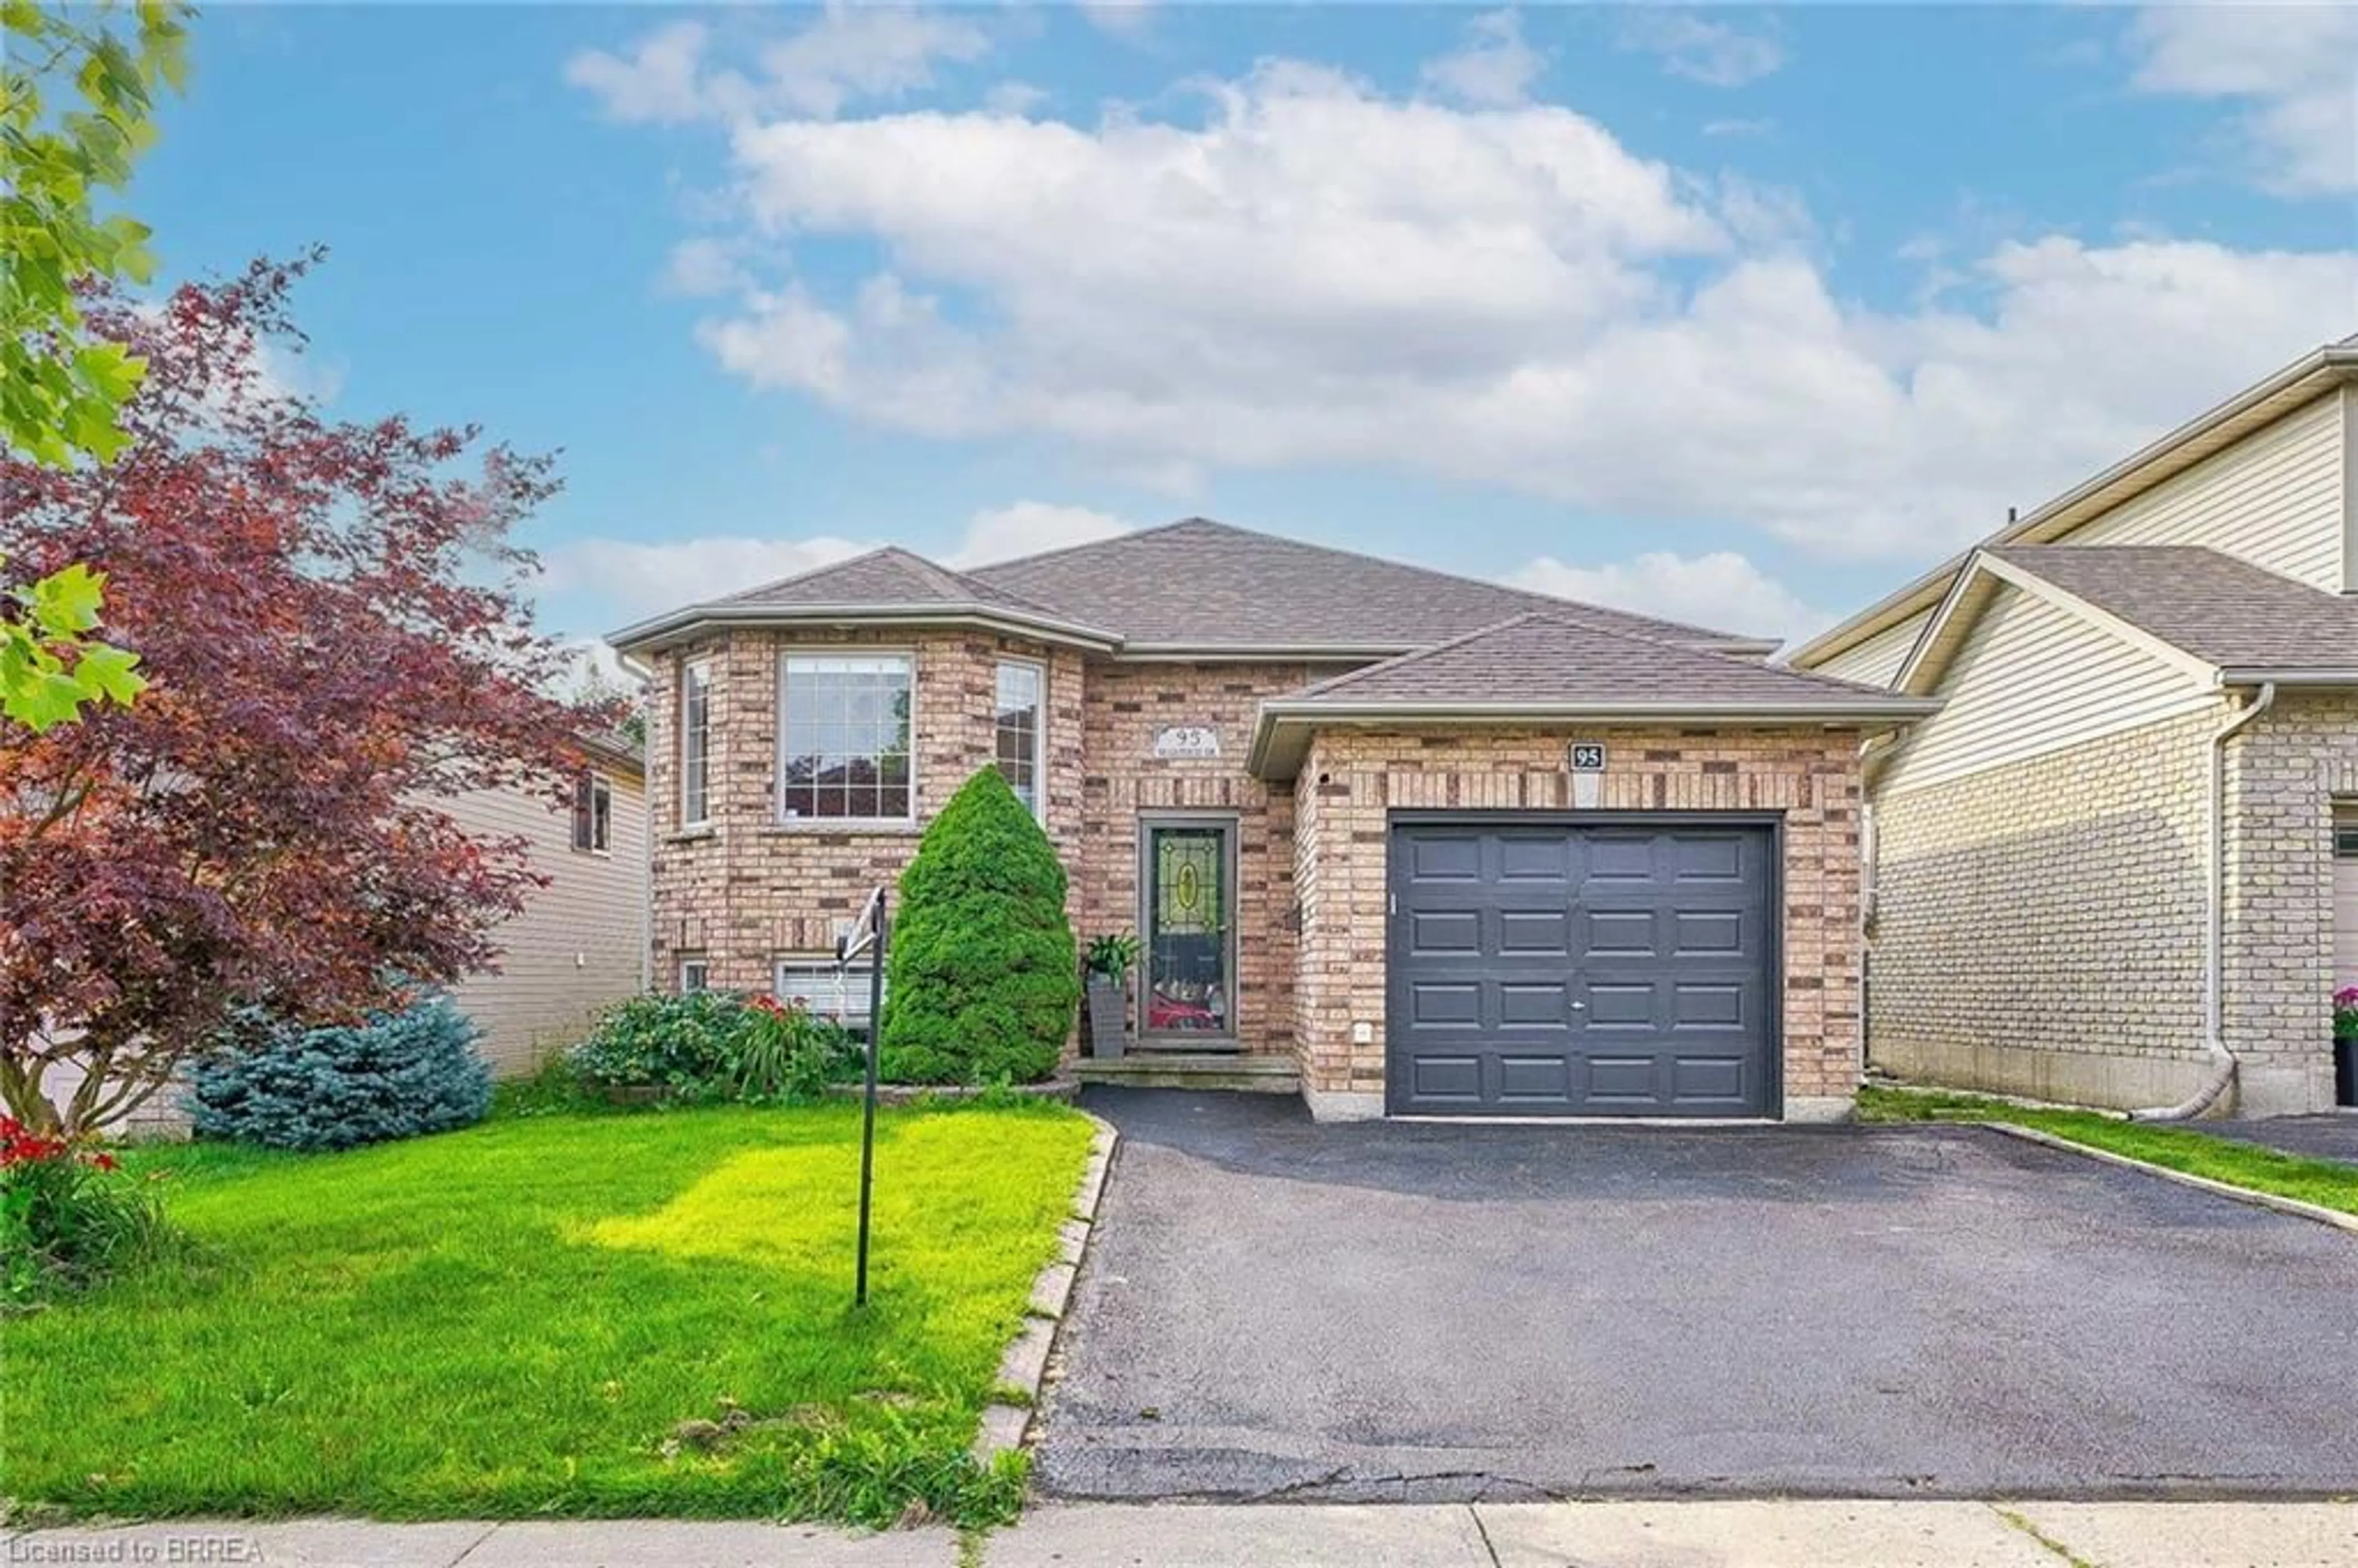 Frontside or backside of a home for 95 Mcguiness Dr, Brantford Ontario N3T 6R6